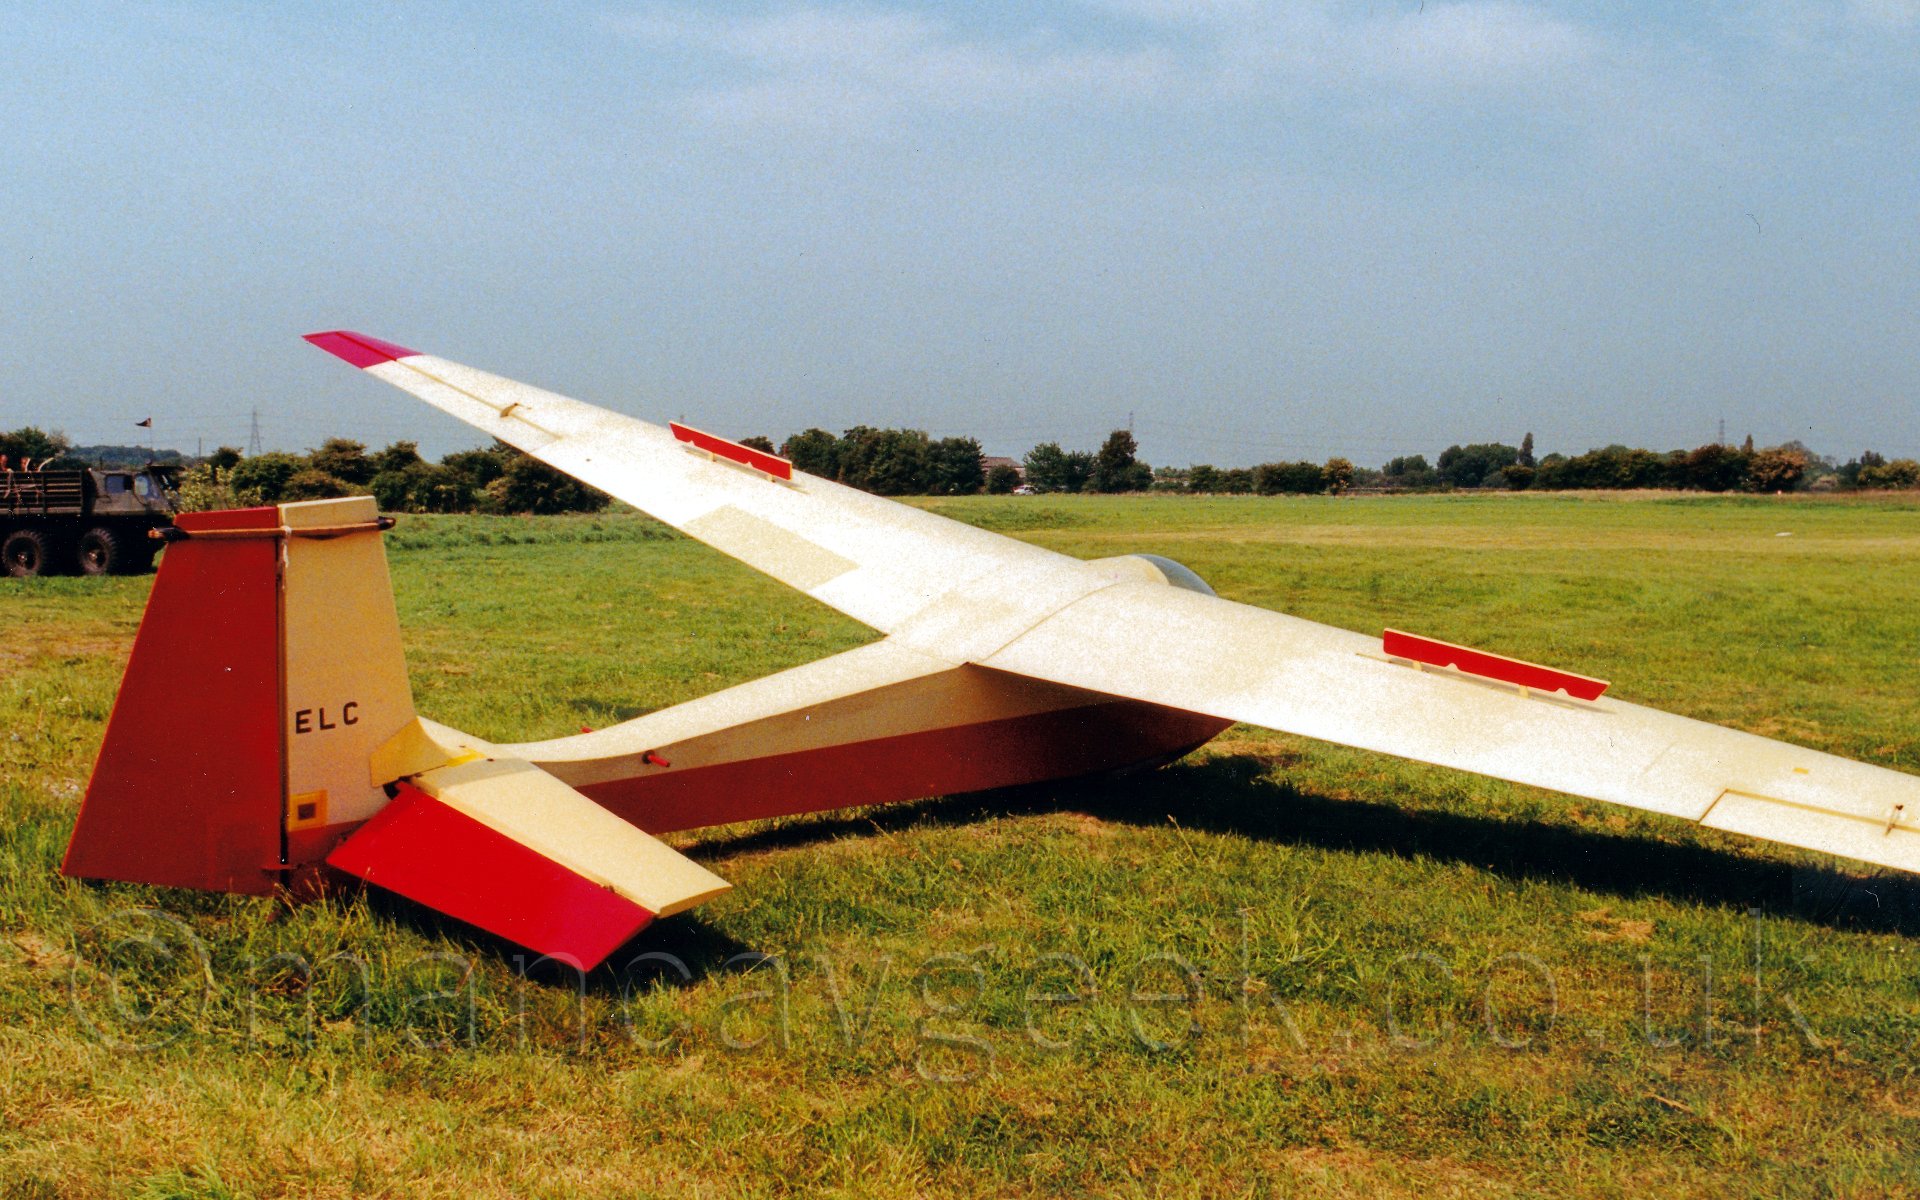 Side view of a single seat glider parked on grass, facing to the right and away from the camera, with one wing resting on the ground, the other up in the air. The glider has a red belly, with creamey-yellow upper surfaces, with the rear half of the tail is also red. In the background, the grass airfield stretches into the distance, leading up to lines of trees on the perimeter. Above, the sky is a hazy blue.